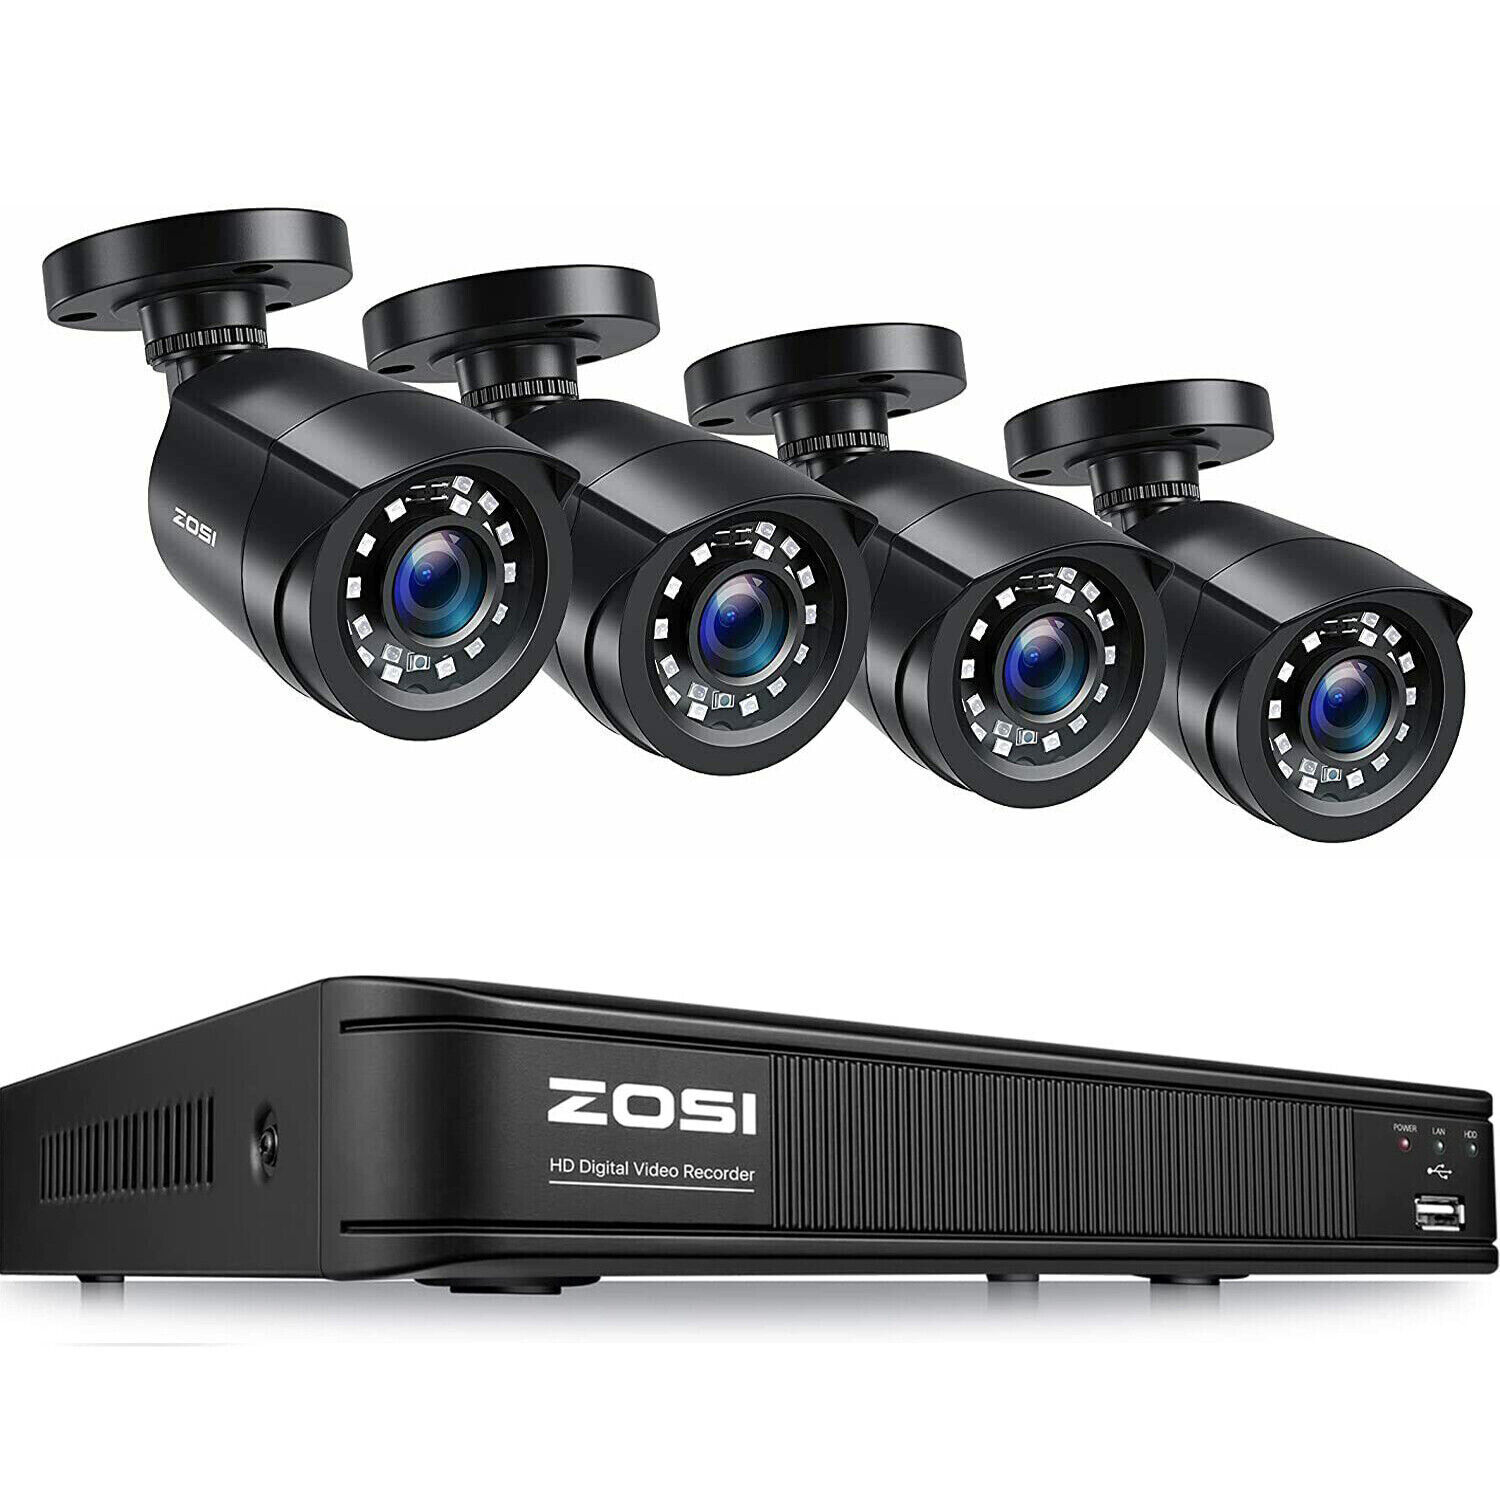 ZOSI 8CH 2MP DVR Outdoor Home CCTV 1080p HD Security Camera System Night Vision ZOSI Does Not Apply